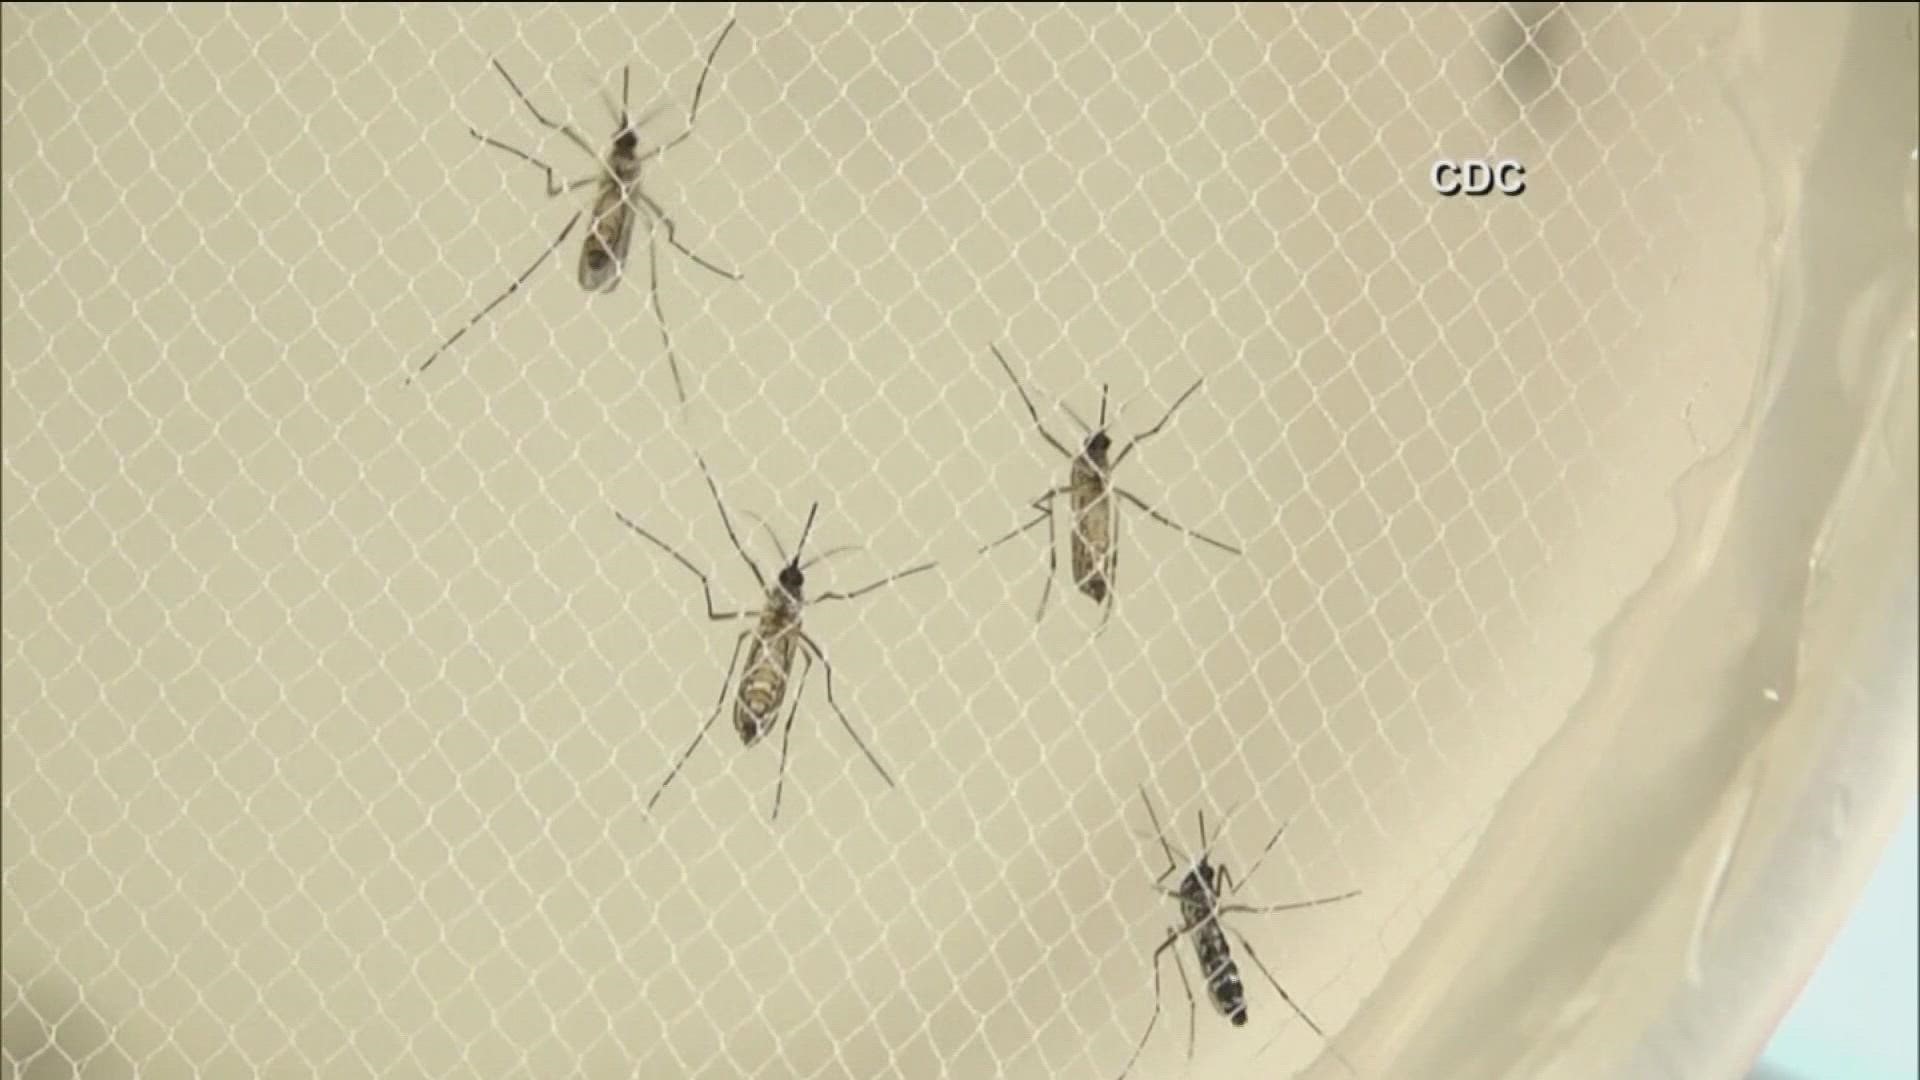 The mosquito samples that tested positive for West Nile were collected at locations in west Boise and Kuna.